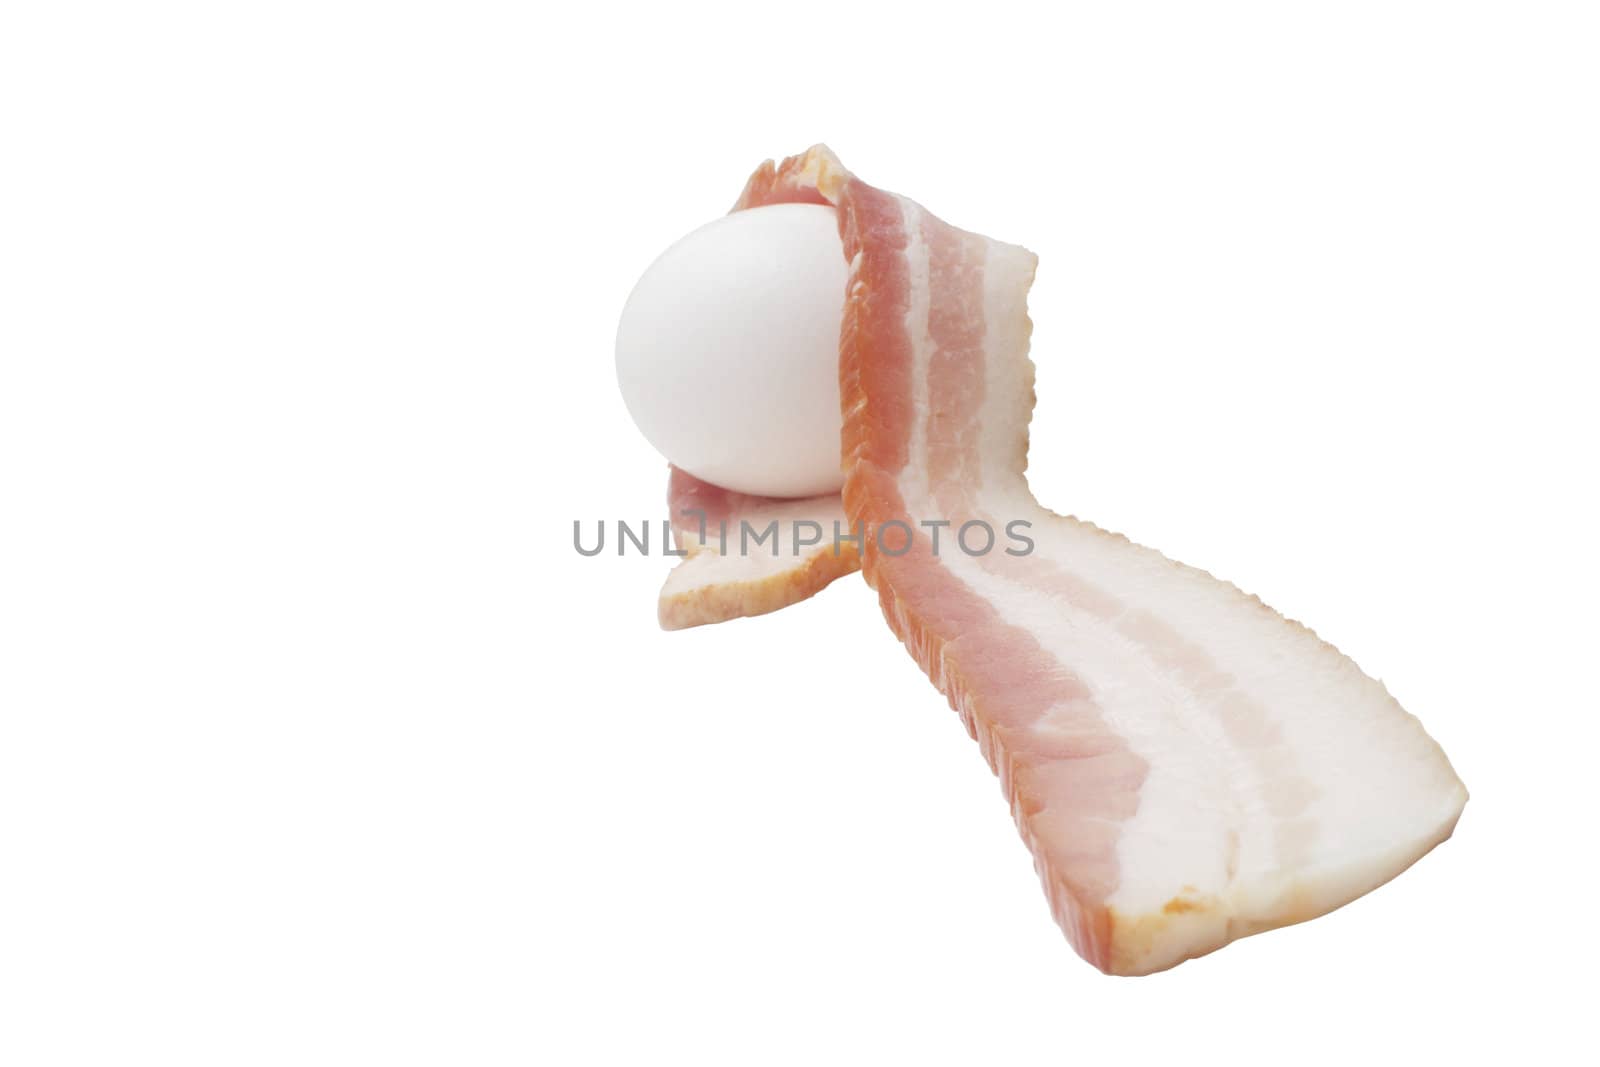 Raw egg and a slice of smoked bacon isolated on white background